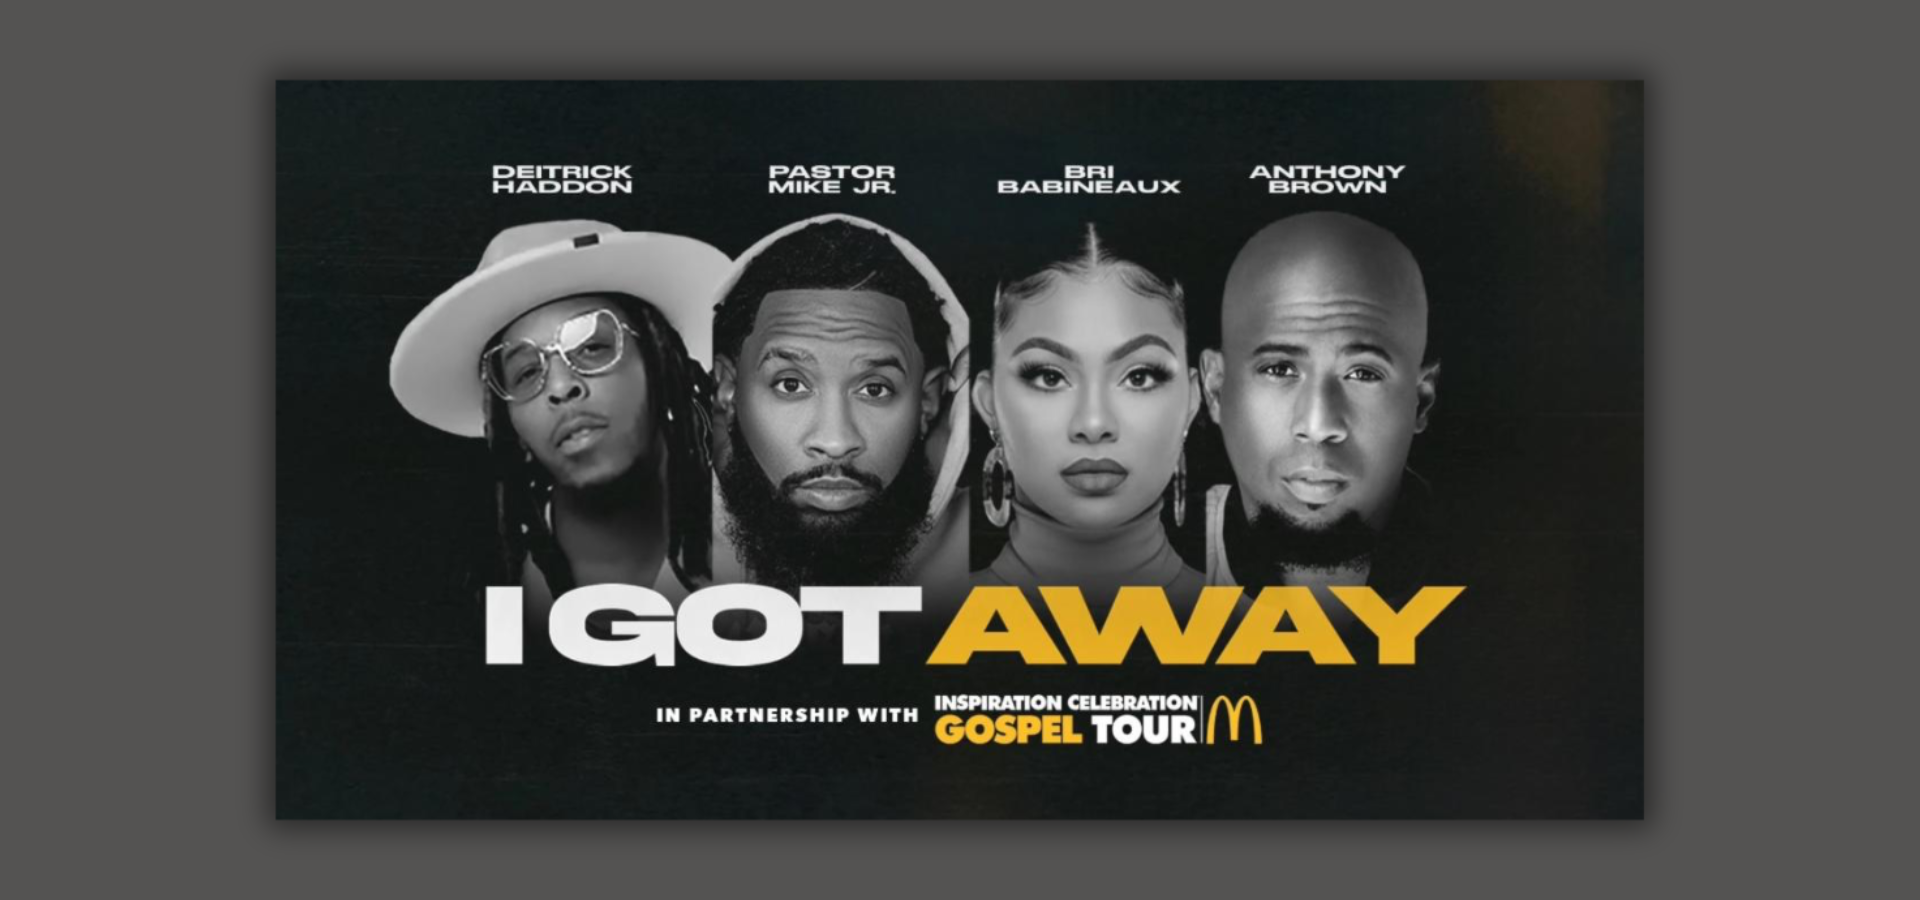 I Got Away Tour With Pastor Mike Jr., Deitrick Haddon, Anthony Brown and Bri Babineaux